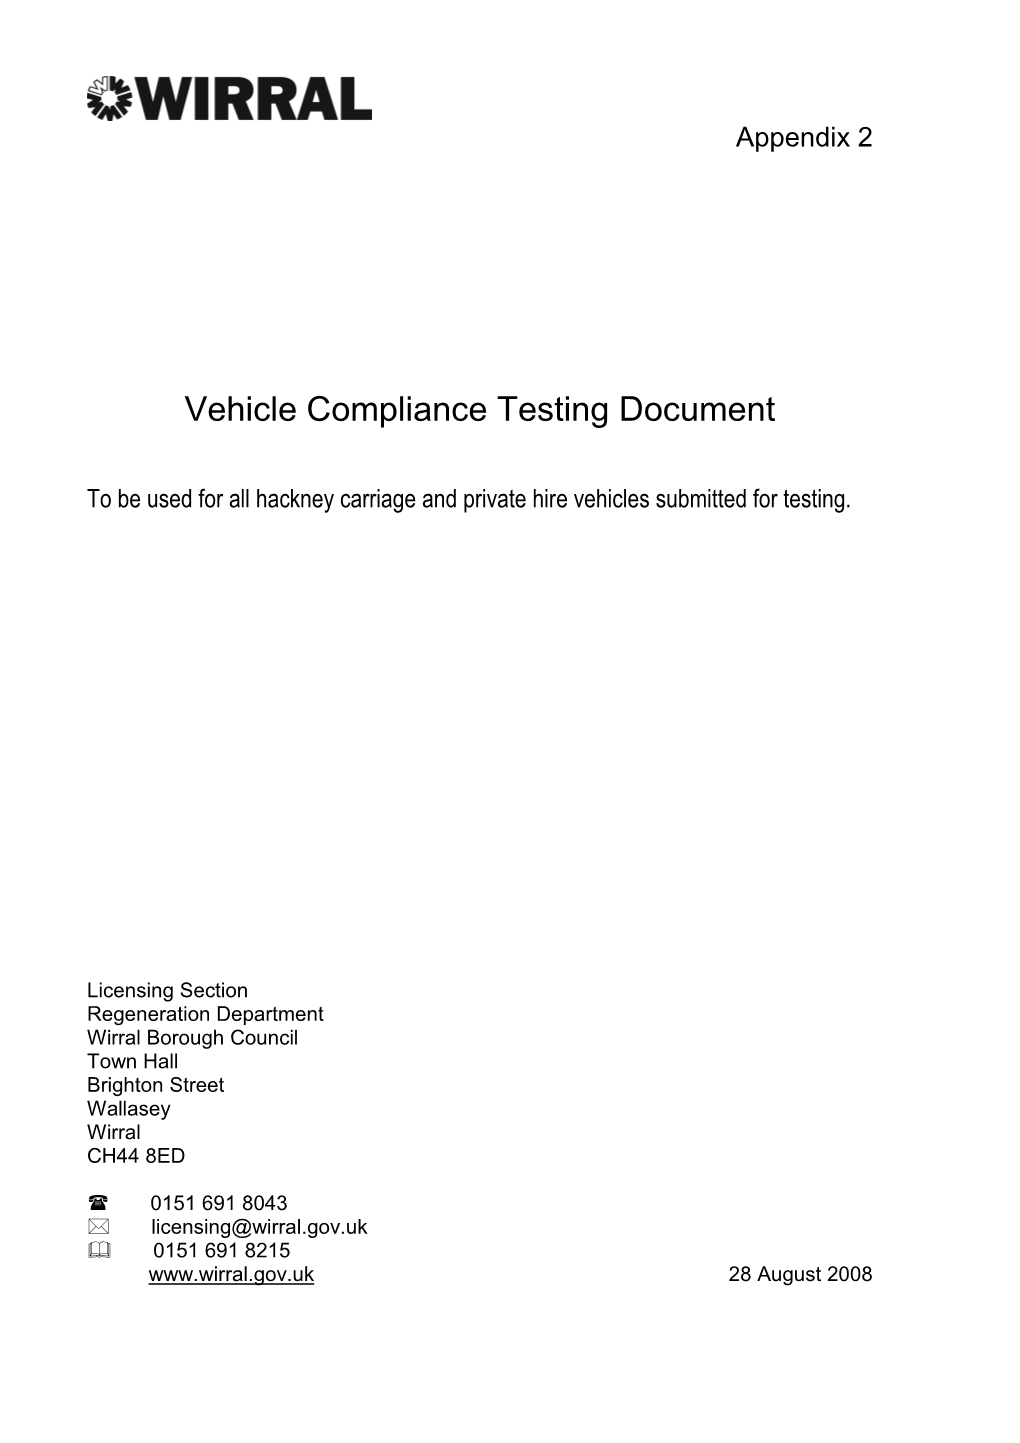 Vehicle Compliance Testing Document